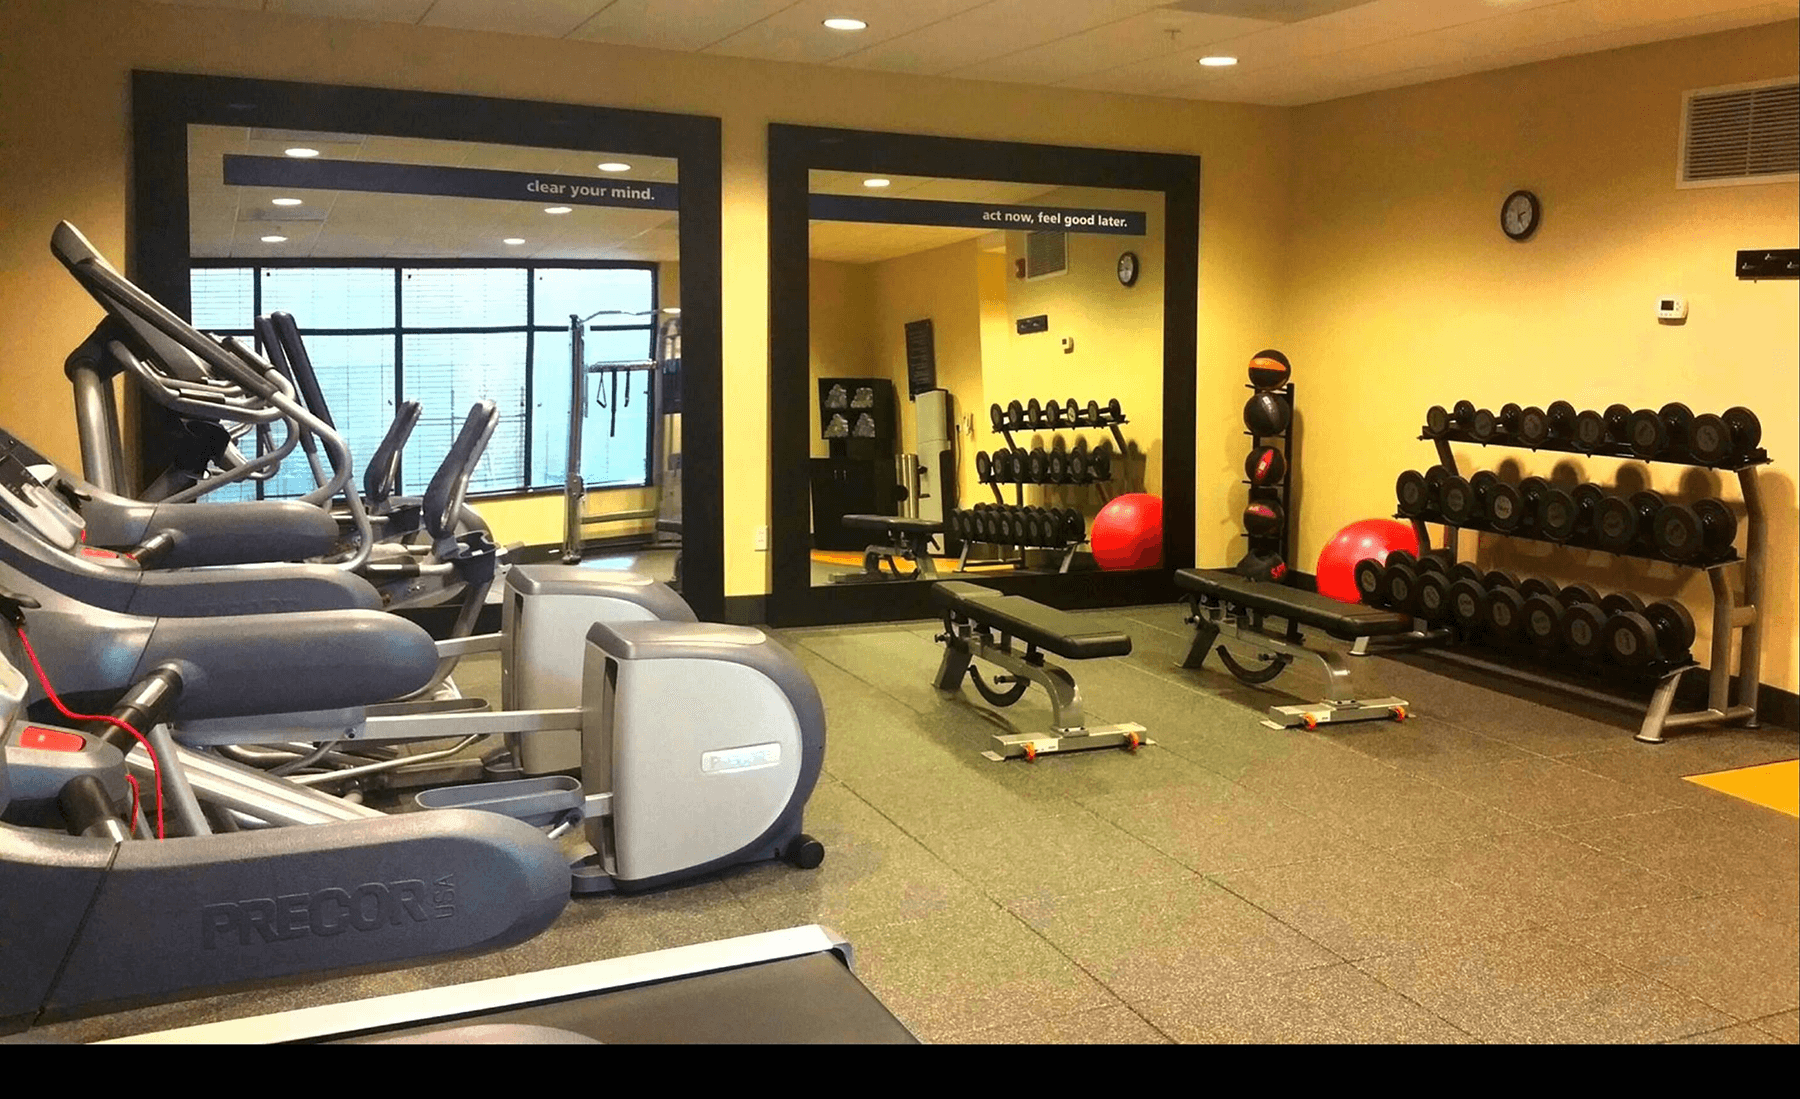  Hampton Inn and Suites Salinas fitness room with weights and exercise machines 